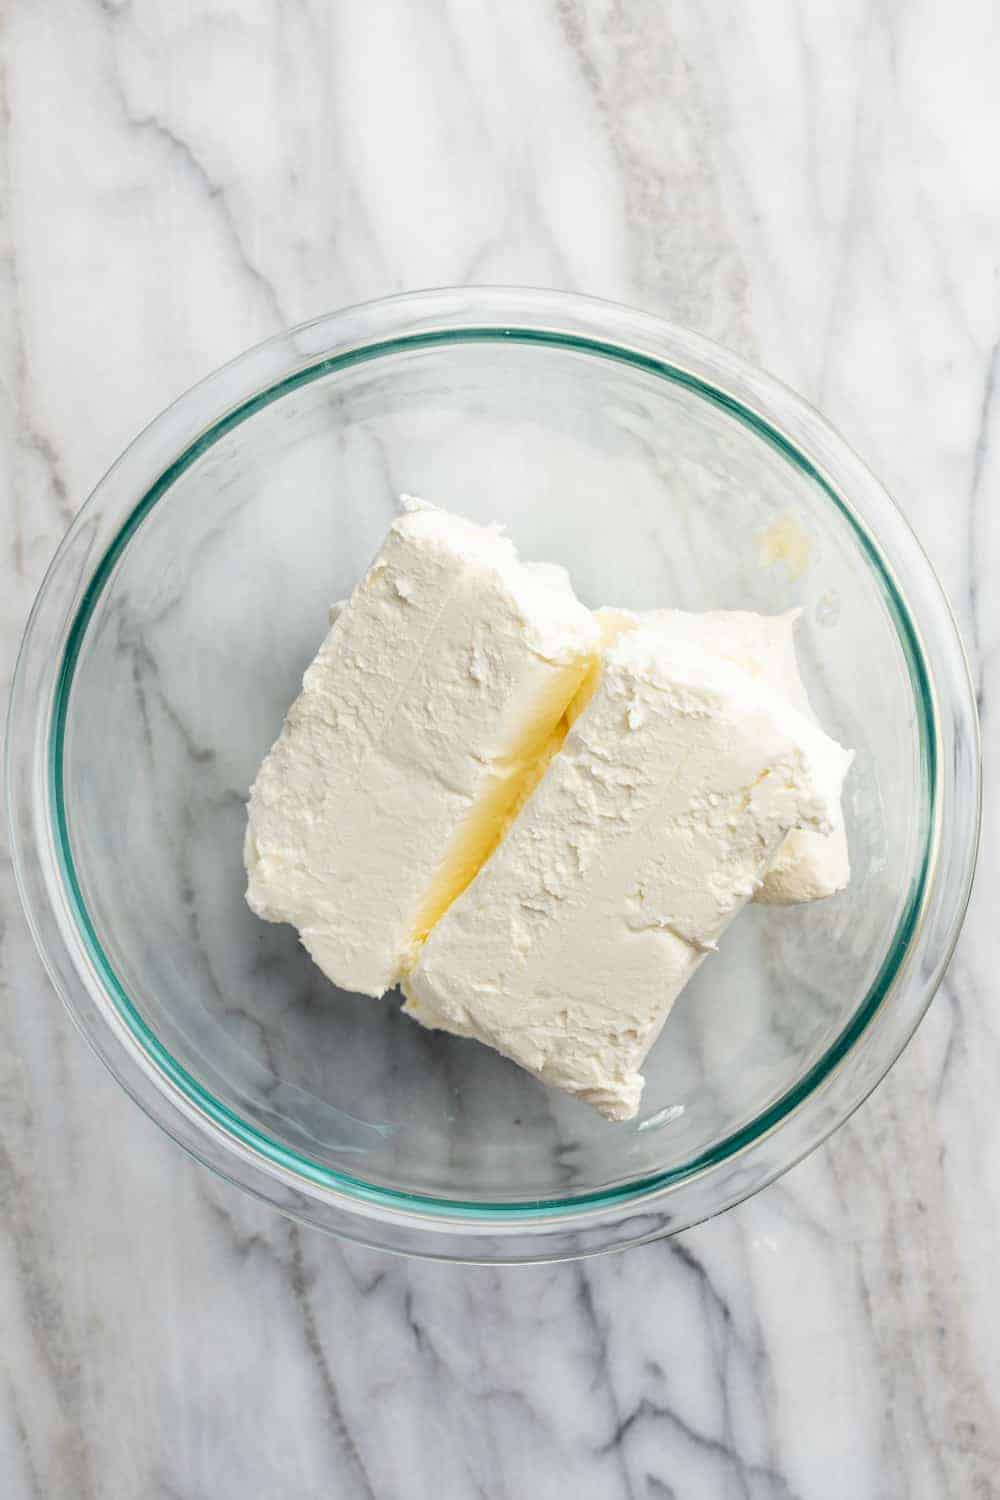 Blocks of softened cream cheese in a glass bowl on a marble surface